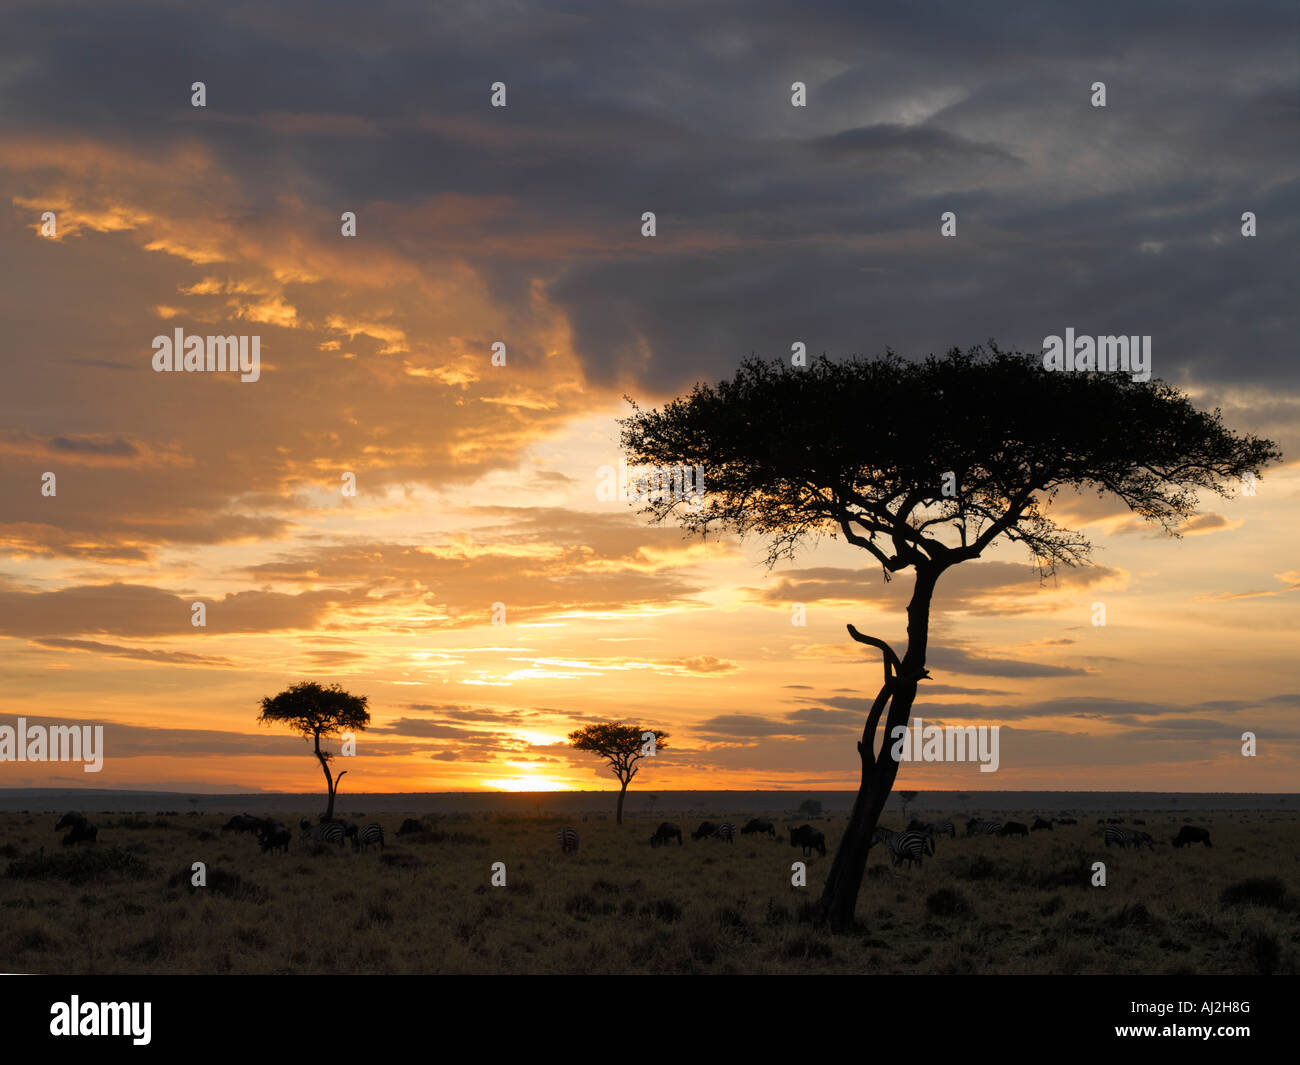 Balanites trees silhouetted by a sunset in Masai Mara Game Reserve, Kenya Stock Photo